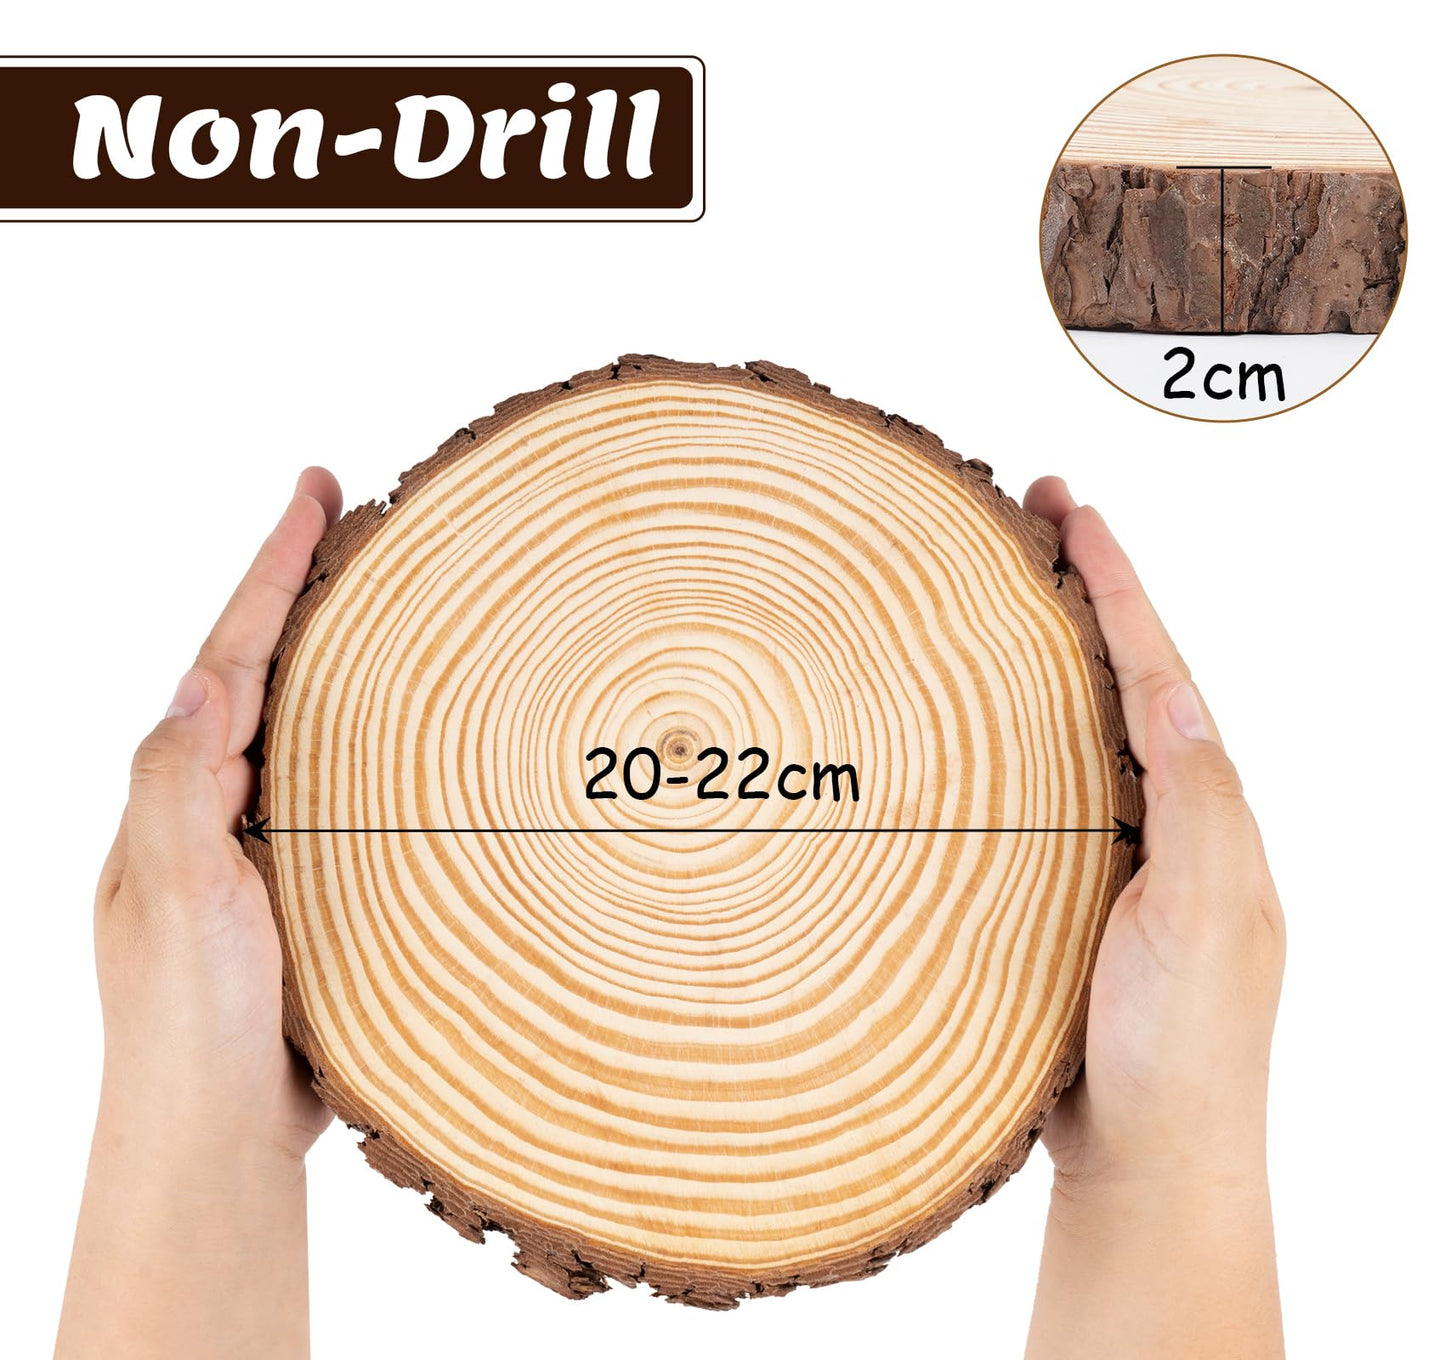 Lemonfilter Natural Wood Slices Craft Wood Kit Wooden Circles Unfinished Log Wooden Rounds for Arts Crafts Wedding Christmas DIY Projects (20-22CM)